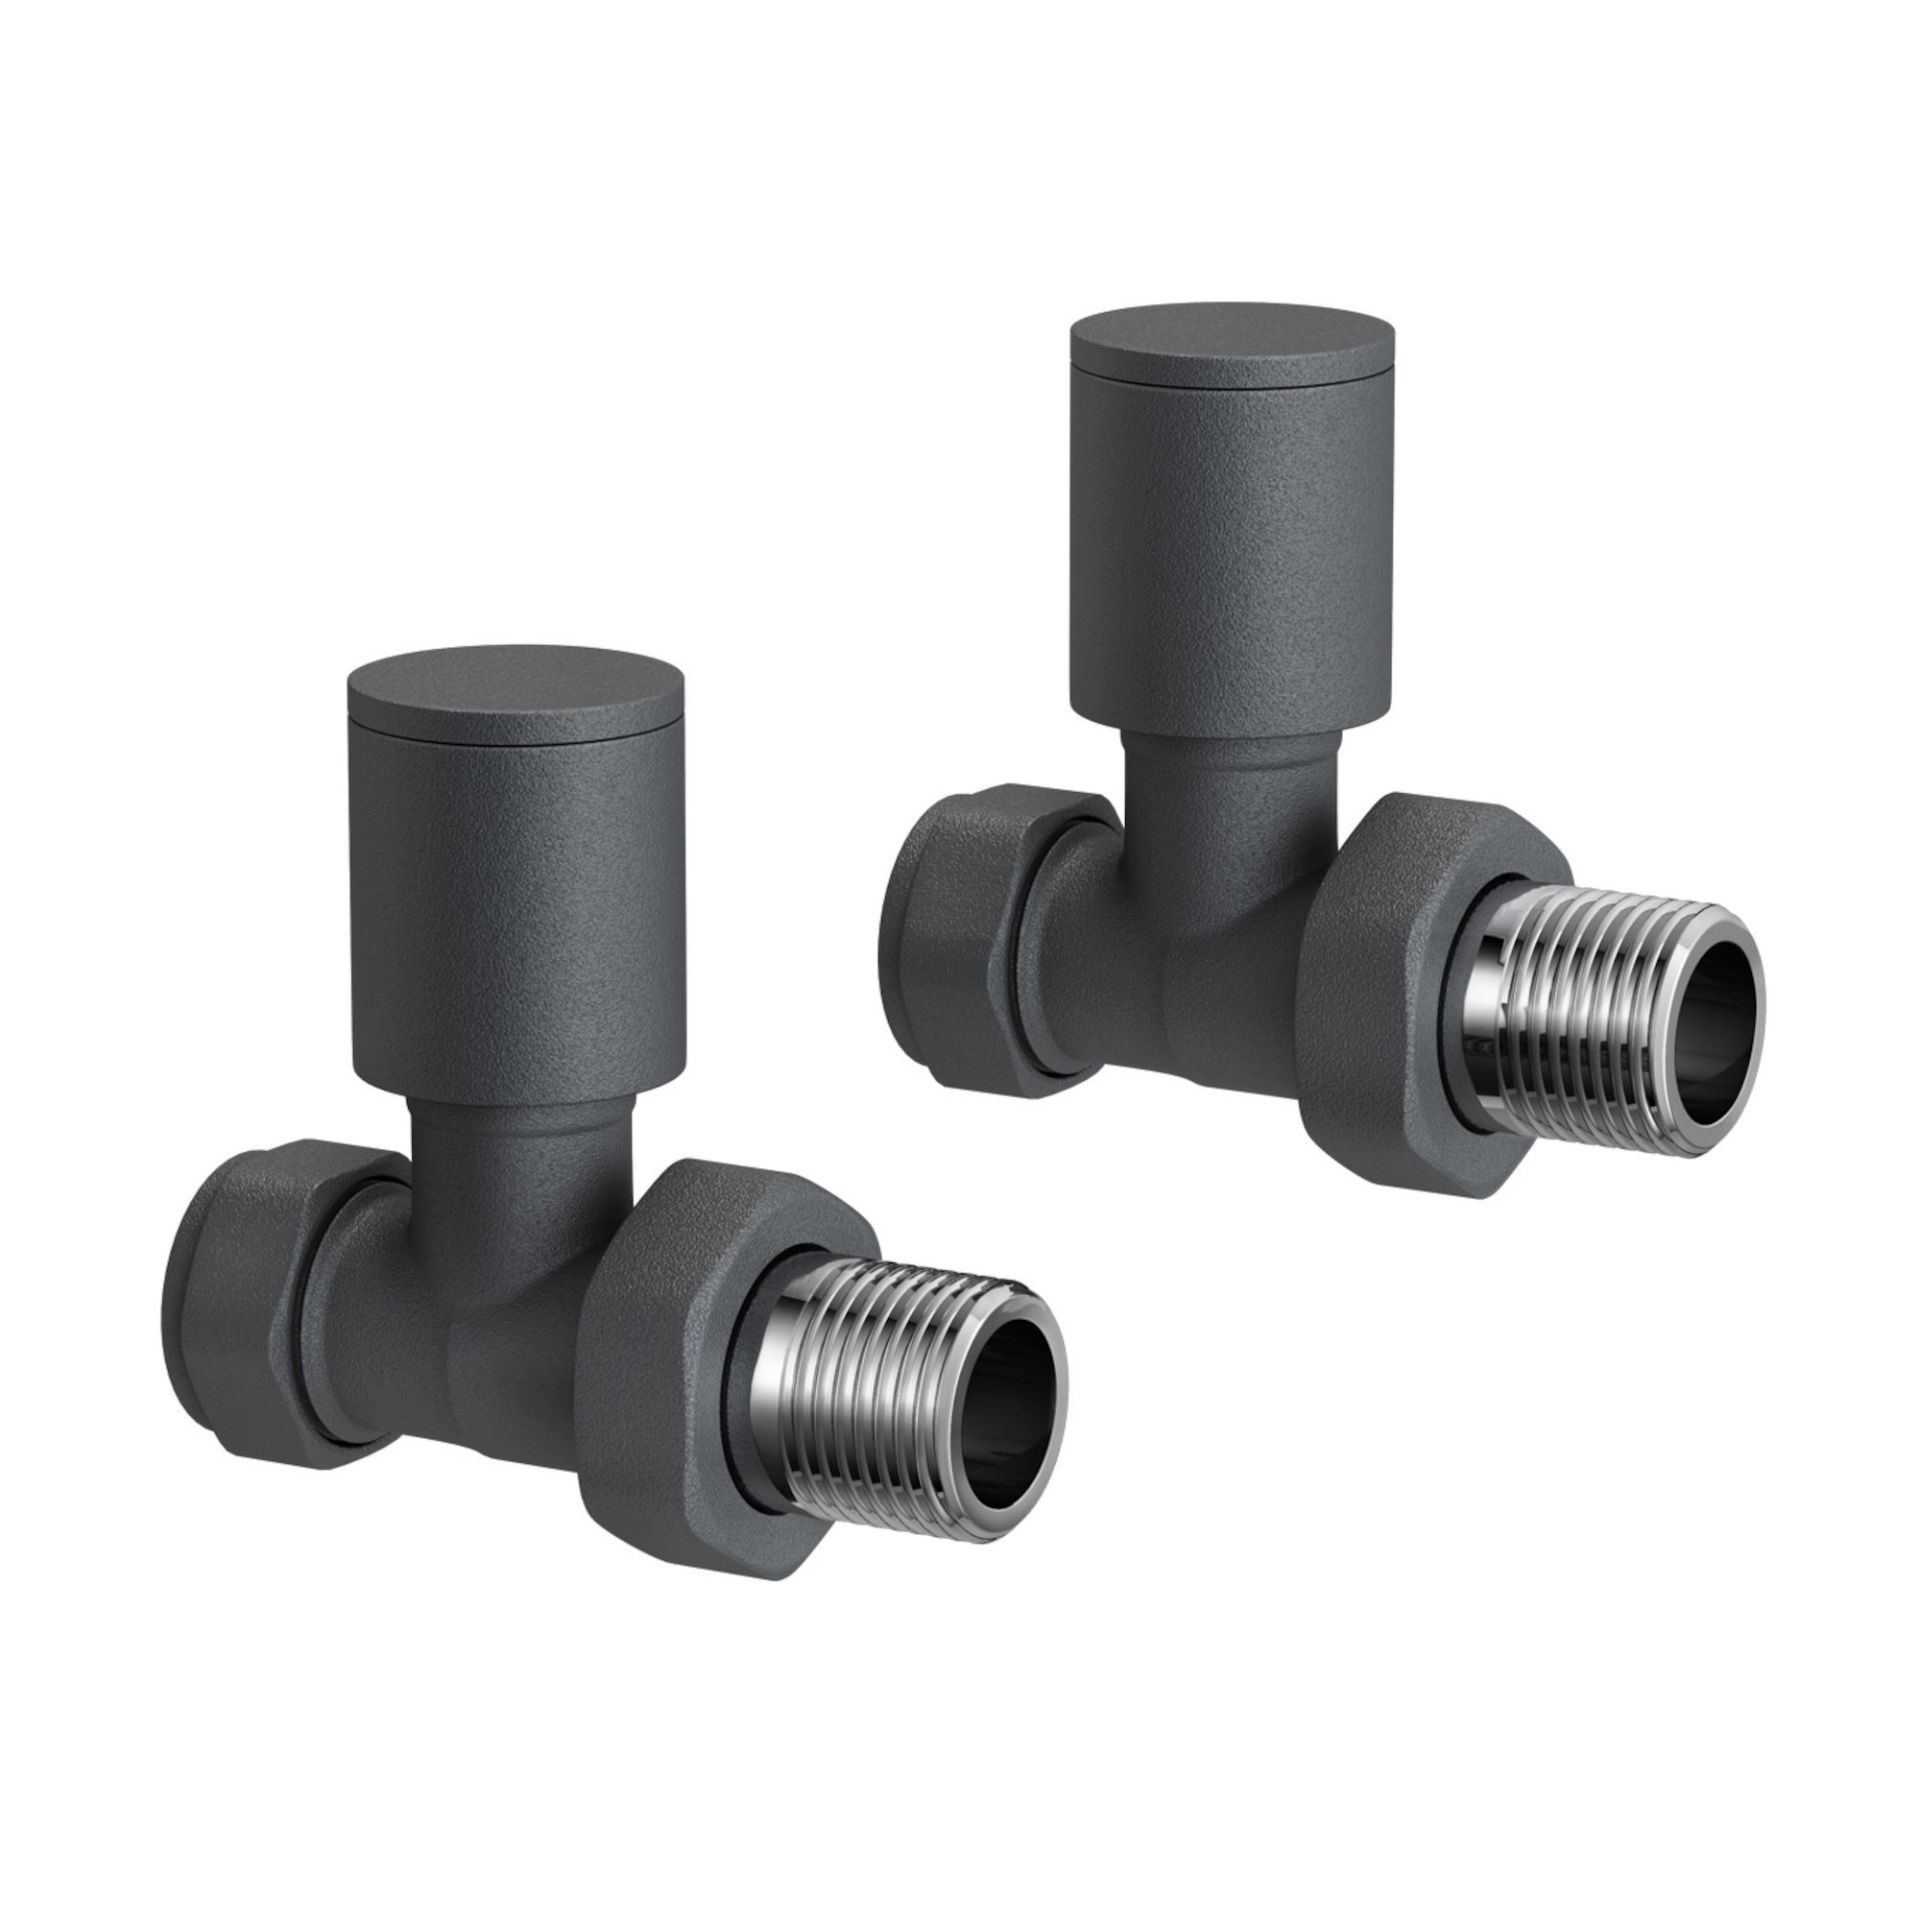 (NV1011) Anthracite Standard Connection Straight Radiator Valves 15mm Contemporary anthracite ... - Image 2 of 2